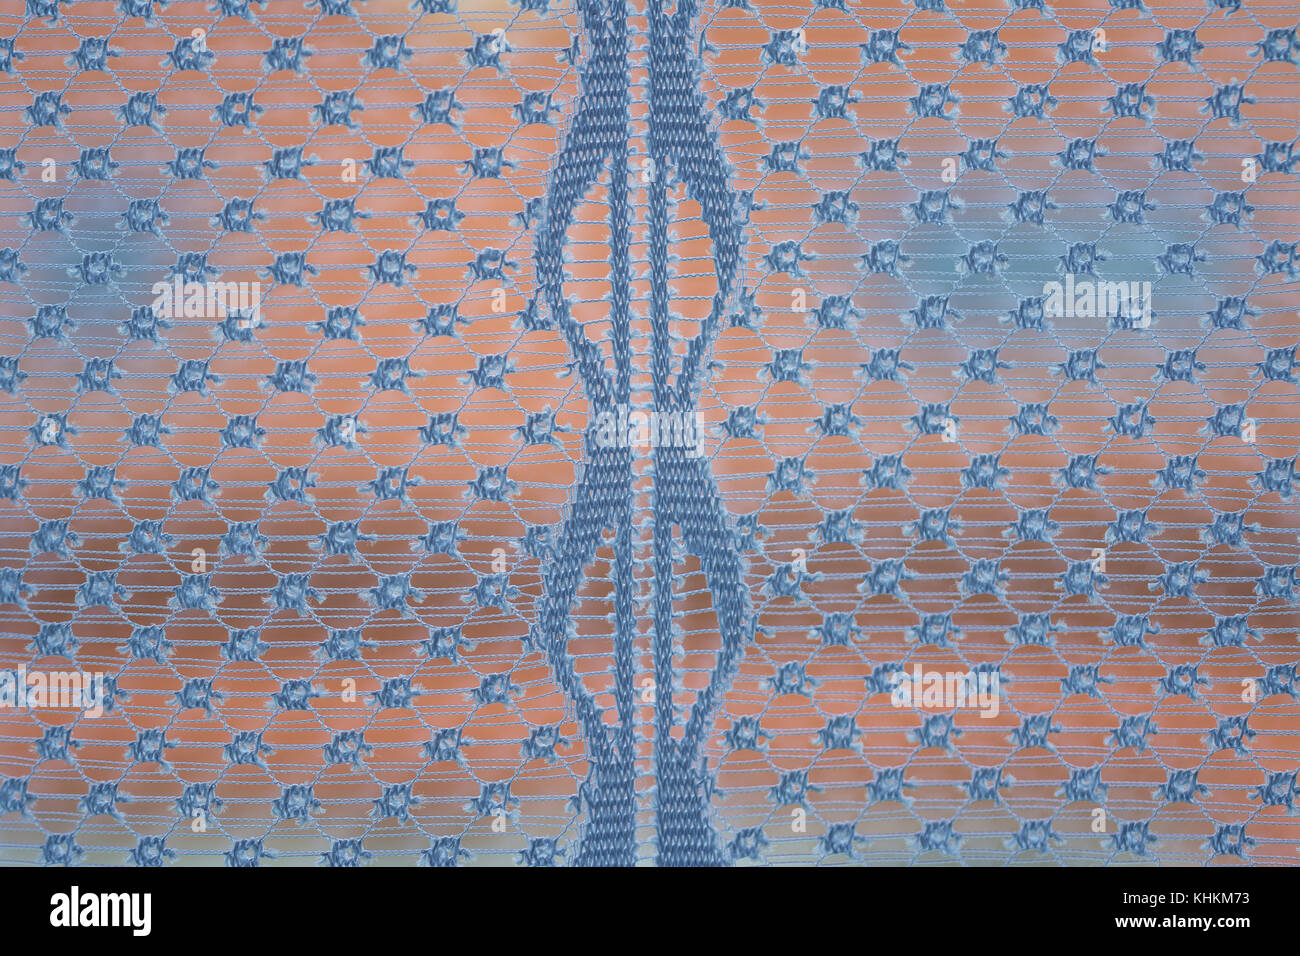 Morning view from window with curtain. Close-up of sheer textile with roof of a house in the background. Stock Photo